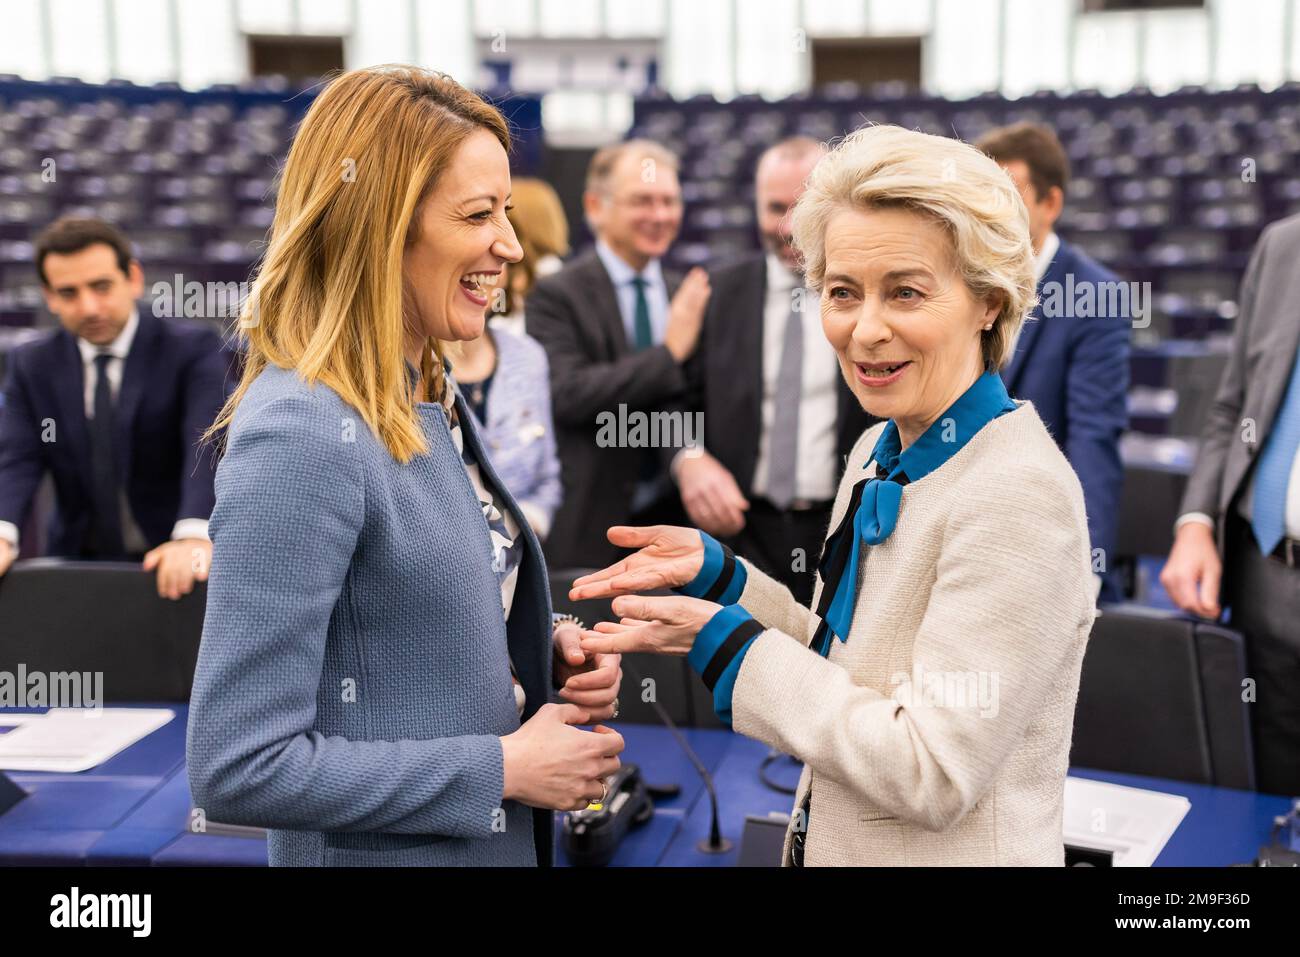 Strasbourg, France. 18 January 2023, France, Straßburg: Roberta Metsola (l, Partit Nazzjonalista), President of the European Parliament, receives birthday wishes from Ursula von der Leyen (CDU), President of the European Commission. On the agenda for Wednesday's four-day plenary week is, among other things, the election for a successor to ex-Parliament Vice President Kaili, who is embroiled in the corruption scandal. Credit: dpa picture alliance/Alamy Live News Stock Photo